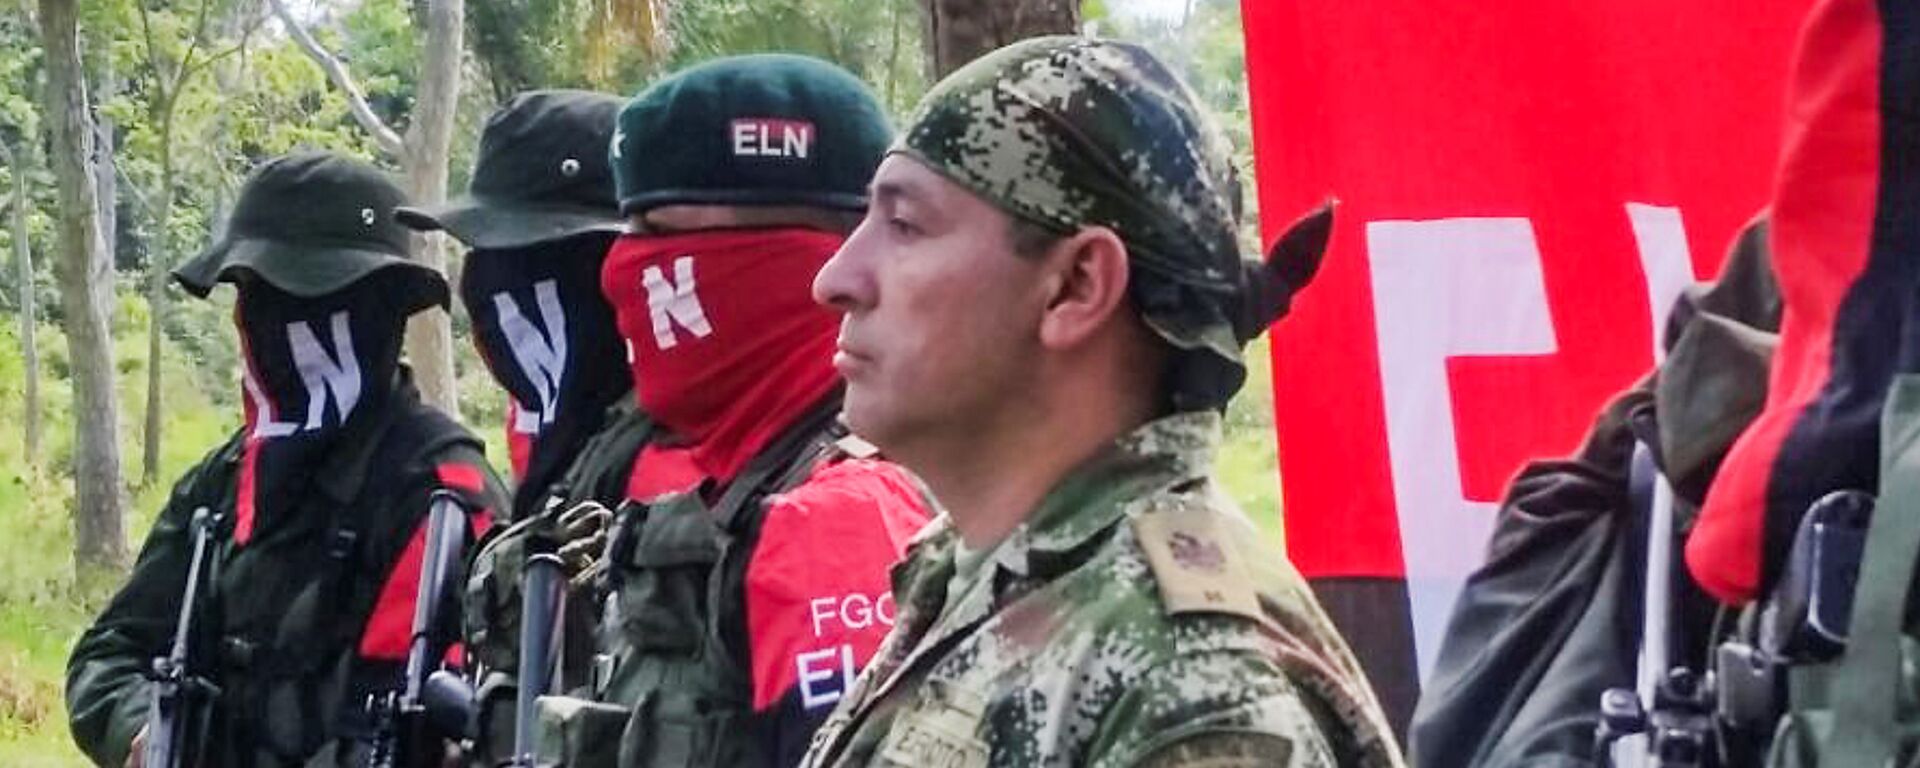 Colombian Soldier Fredy Moreno (R) who was kidnaped by National Liberation Army (ELN), is seen next to ELN members, before his release in Arauca, Colombia on February 6 2017 - Sputnik Mundo, 1920, 17.02.2023